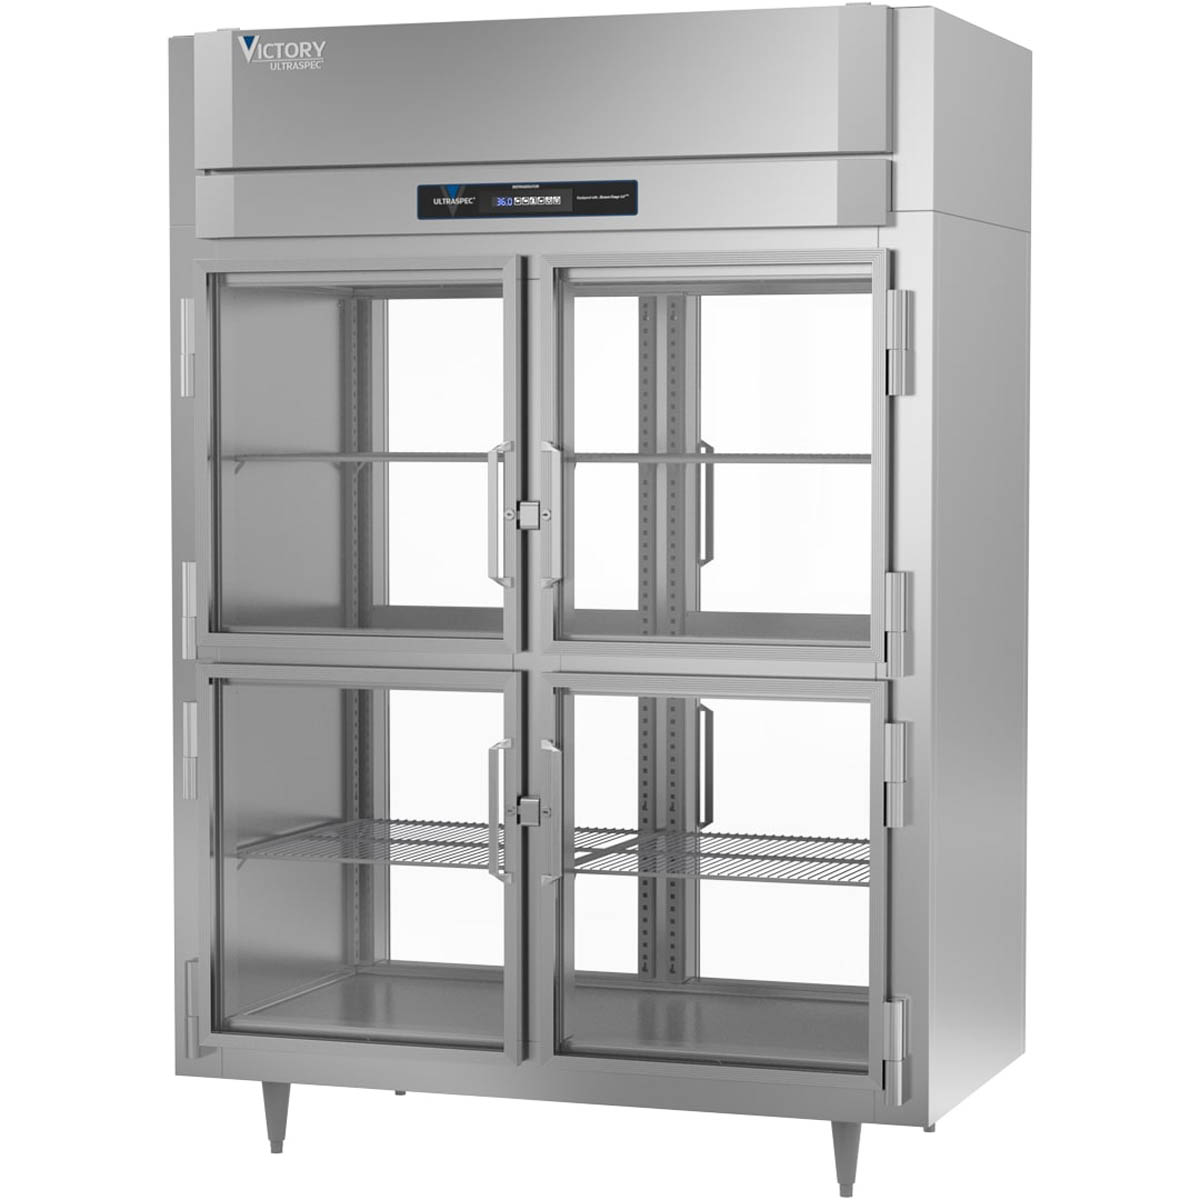 Victory RS-2D-S1-EW-PT-HG-HC Two Section Wide Pass-Thru Refrigerator w/ 8 Glass Swing Half Doors, Stainless Steel, 53 cu. ft.